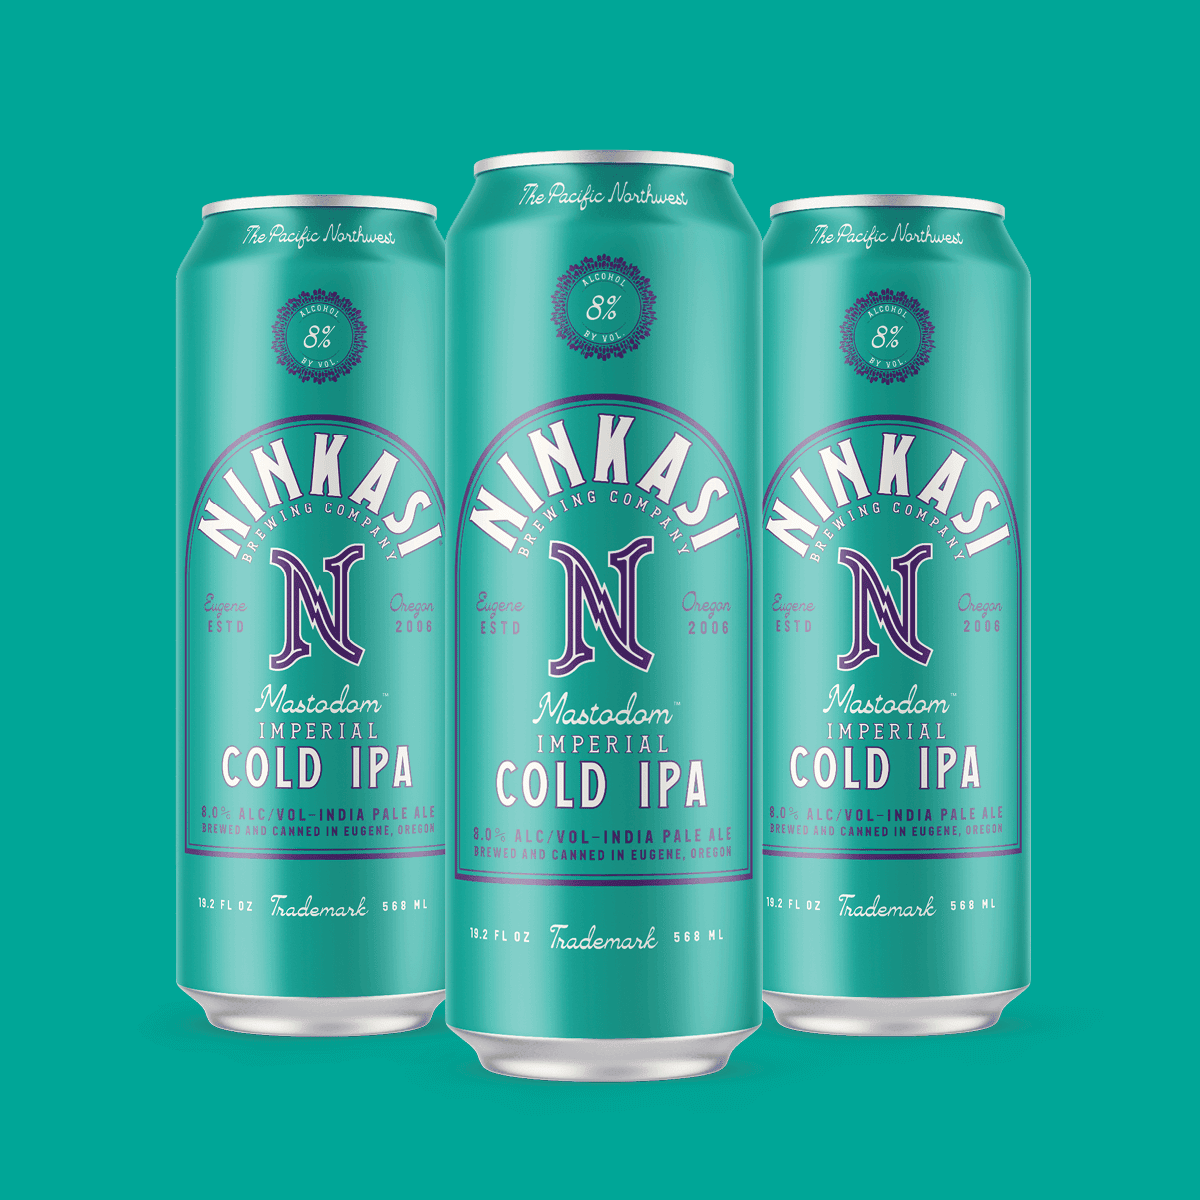 Three tall cans of Ninkasi's "Mastodom Imperial Cold IPA" displayed against a turquoise background. The cans sport a refreshing turquoise and purple design, highlighting the beer's Pacific Northwest origins. Each can prominently displays an "8% ALC/VOL" label, indicating its alcohol content. The beer is emphasized as an "Imperial Cold IPA", brewed and canned in Eugene, Oregon since 2006. The design also includes the Ninkasi logo and each can contains 19.2 fl oz.